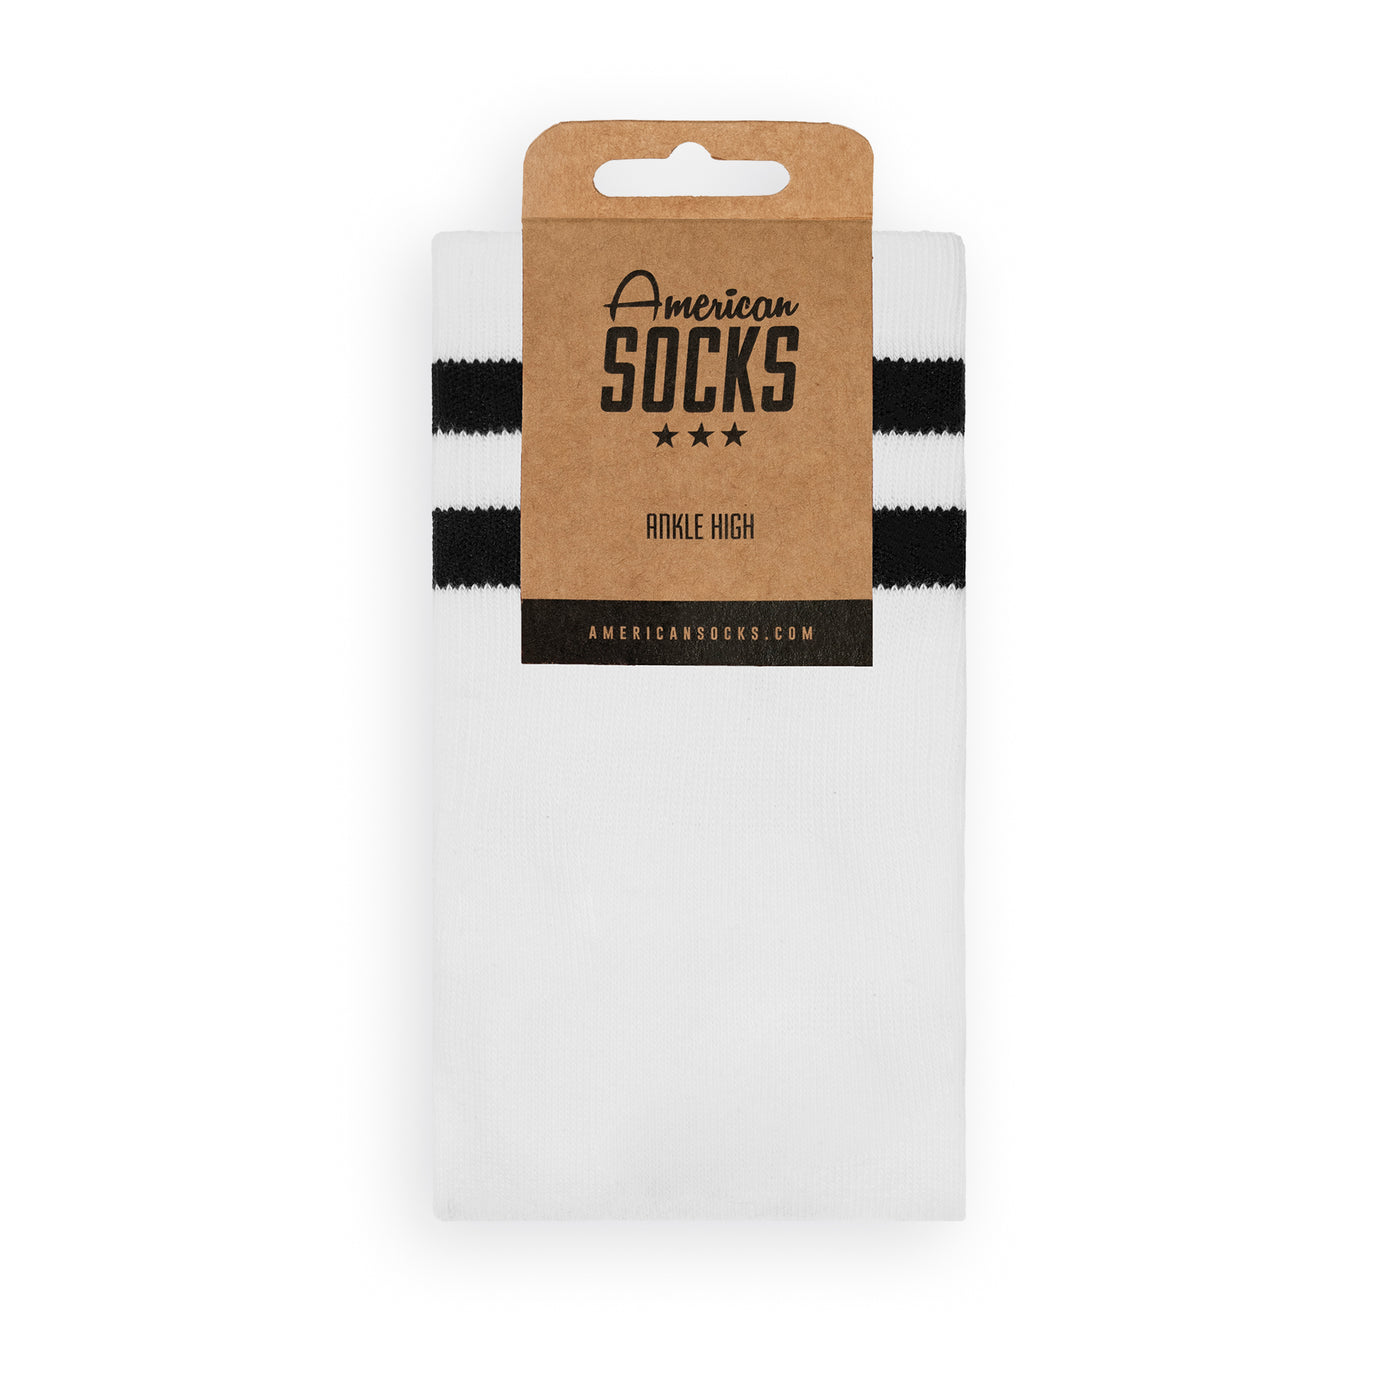 Old School - Ankle High - AmericanSocks